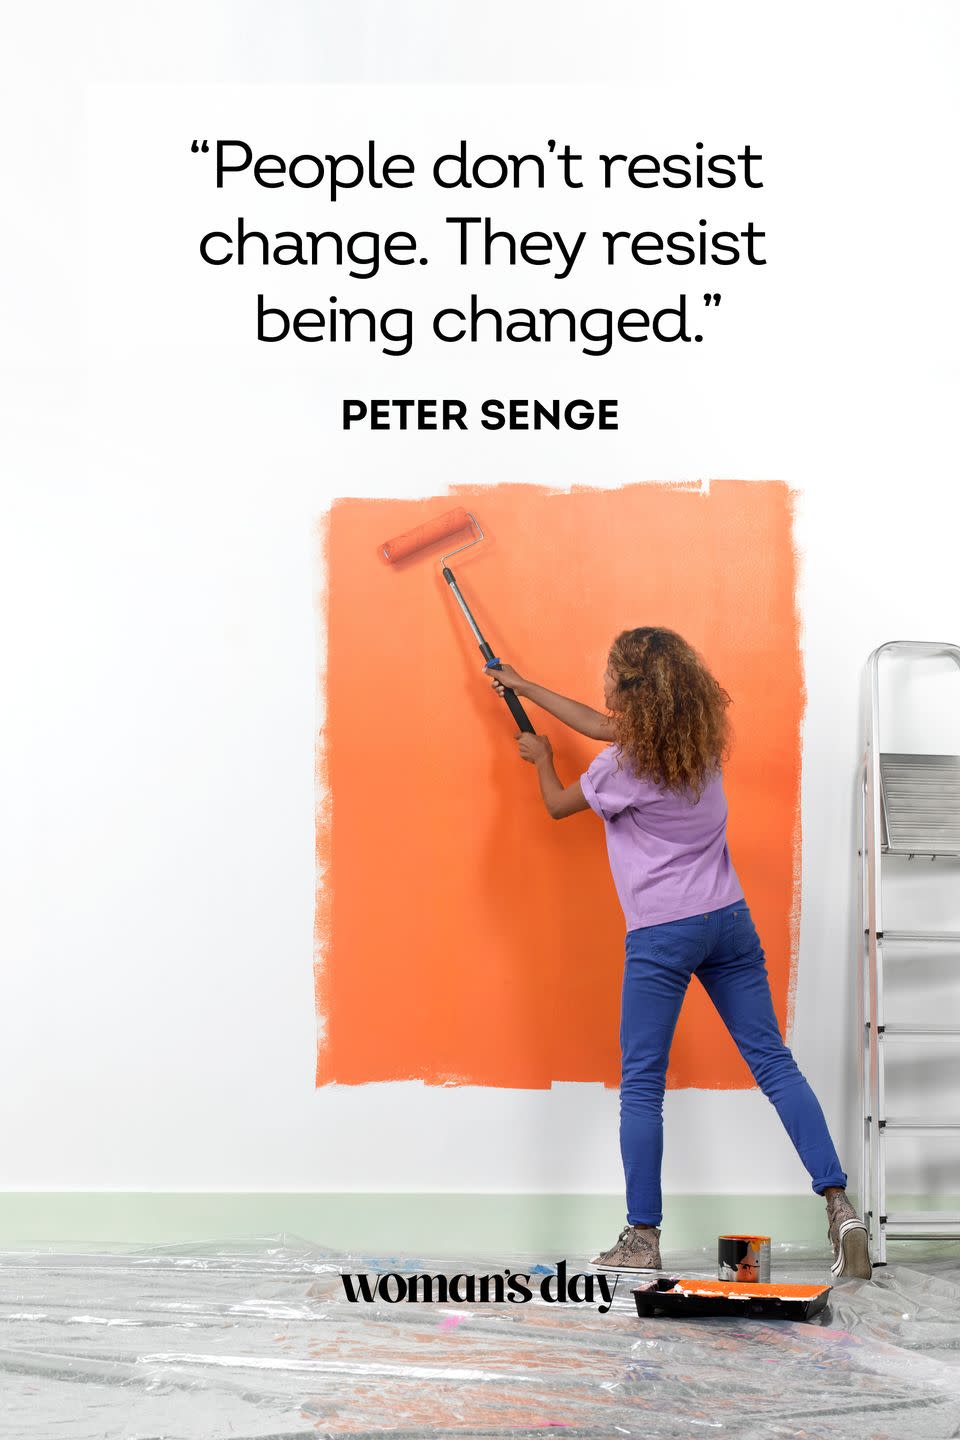 <p>“People don’t resist change. They resist being changed.”</p>